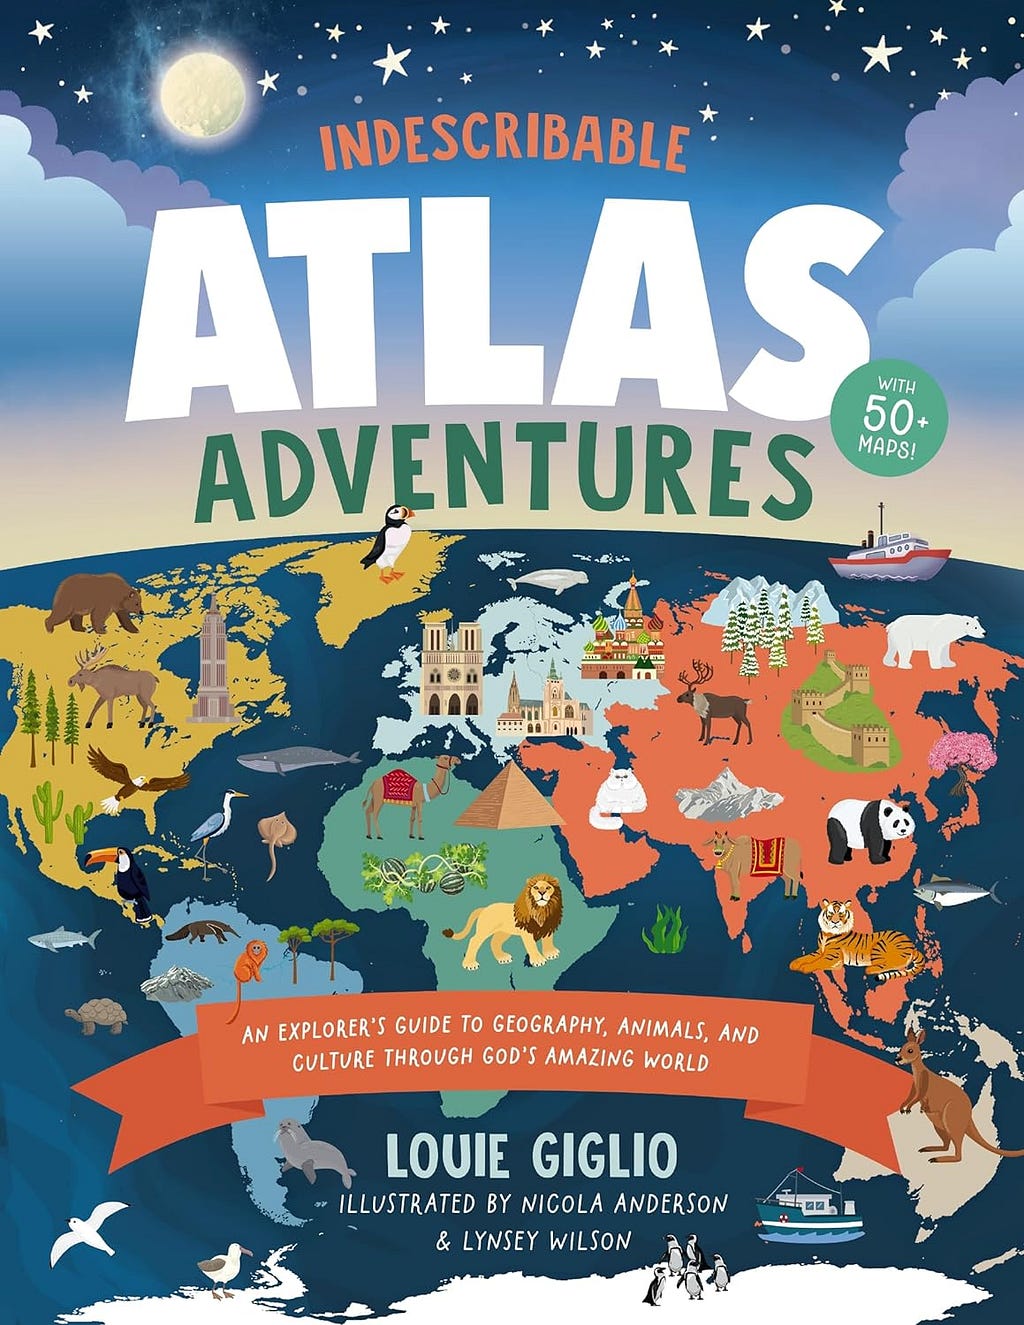 [PDF] Indescribable Atlas Adventures: An Explorer's Guide to Geography, Animals, and Cultures Through God's Amazing World By Louie Giglio